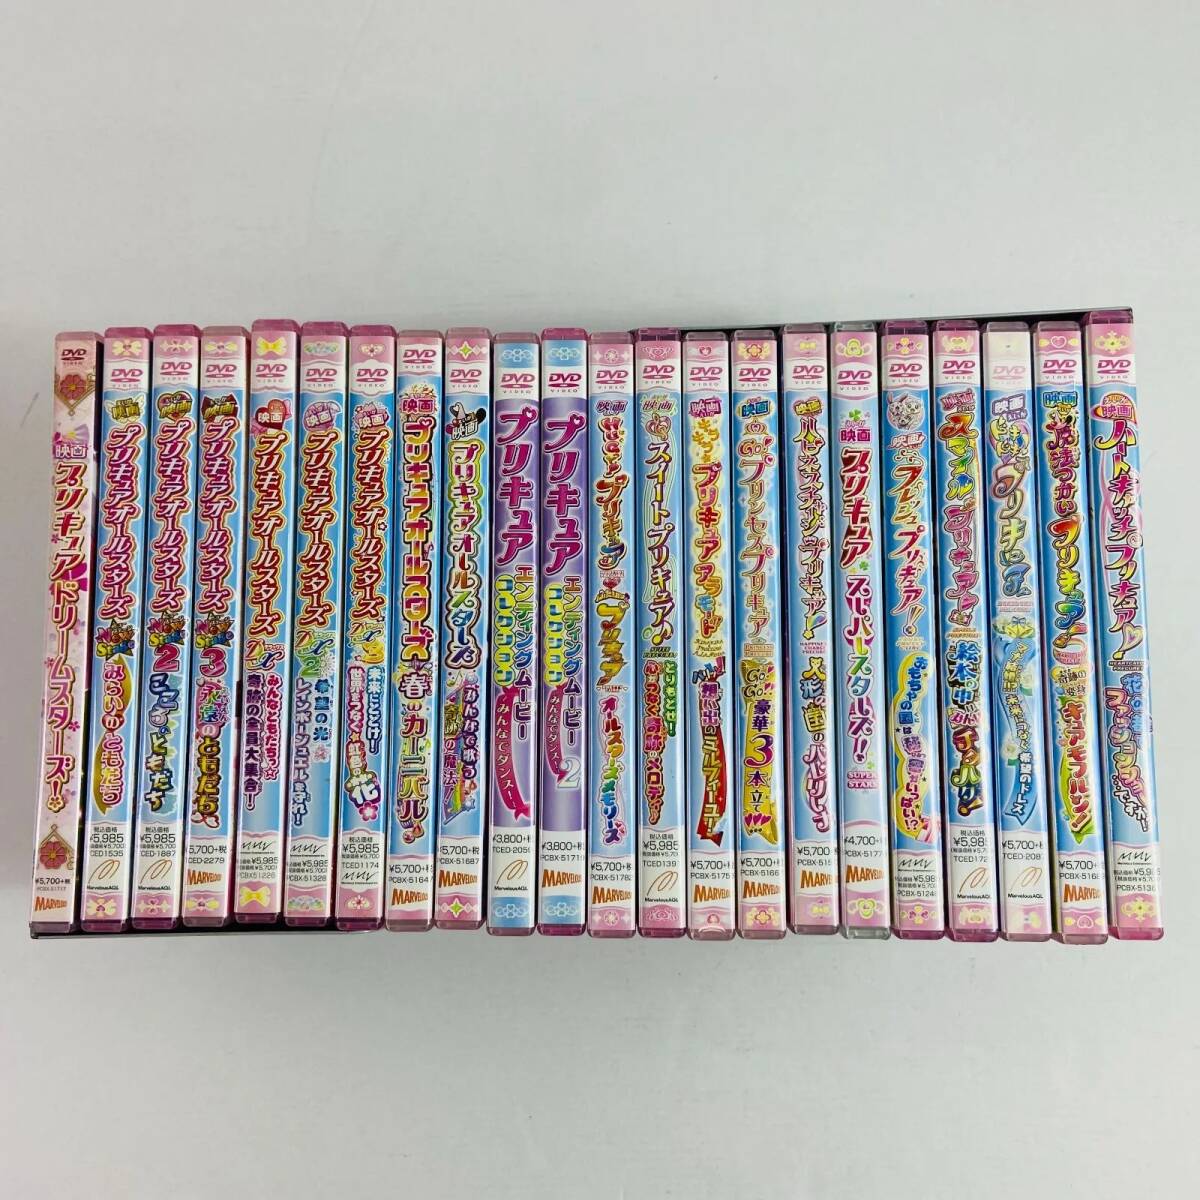 (25591) #DVD Precure theater version 24ps.@ set sale Precure Dream Star z/ Precure All Stars other secondhand goods 